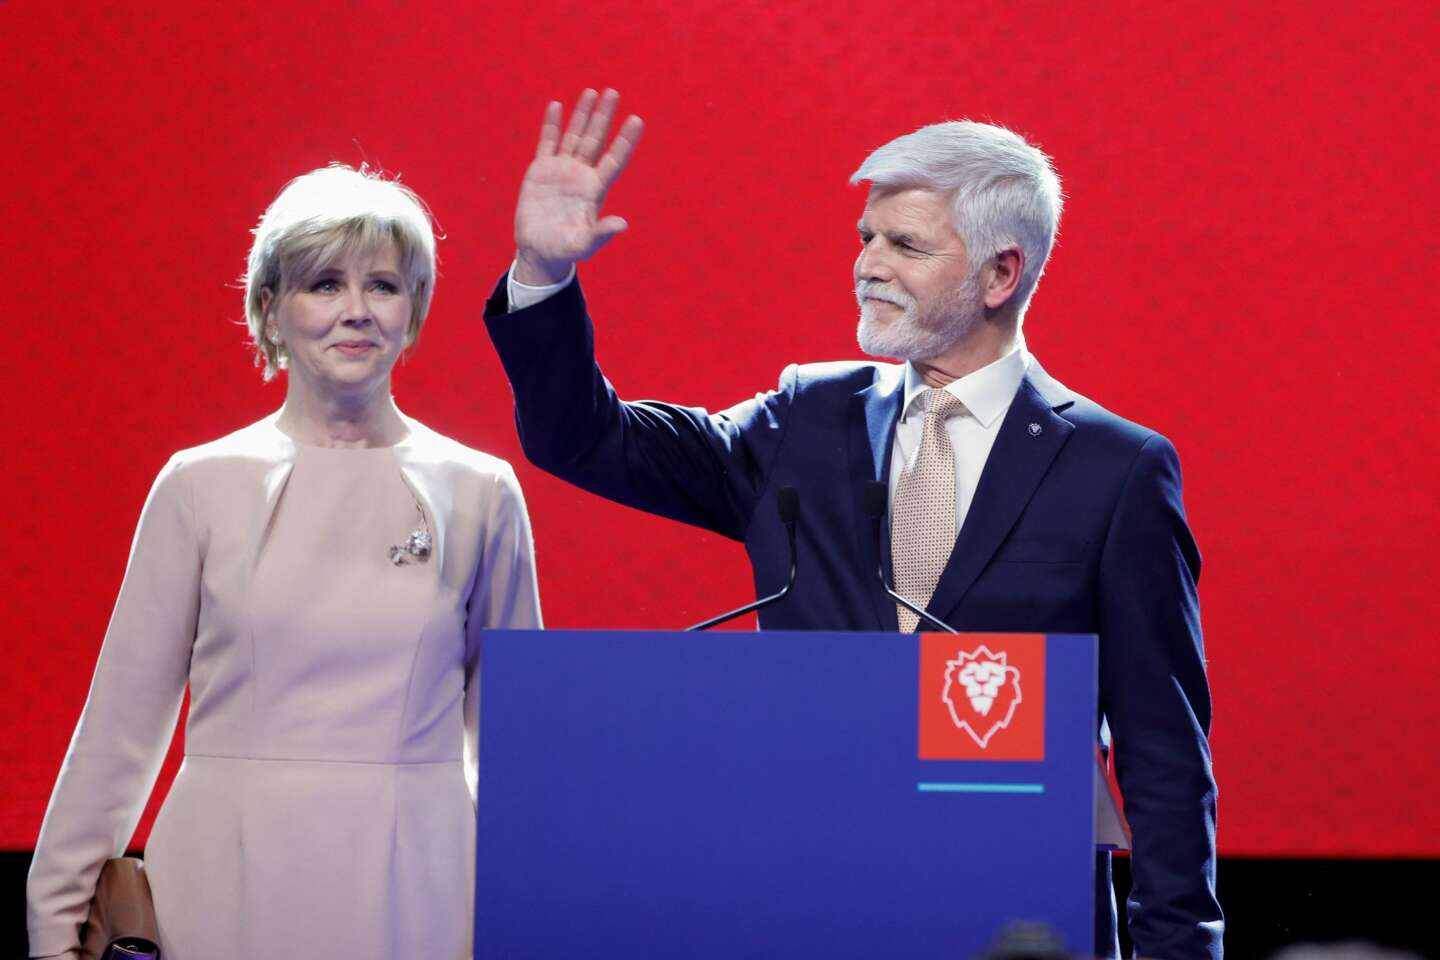 Petr Pavel, former NATO general, wins the presidential election in the Czech Republic